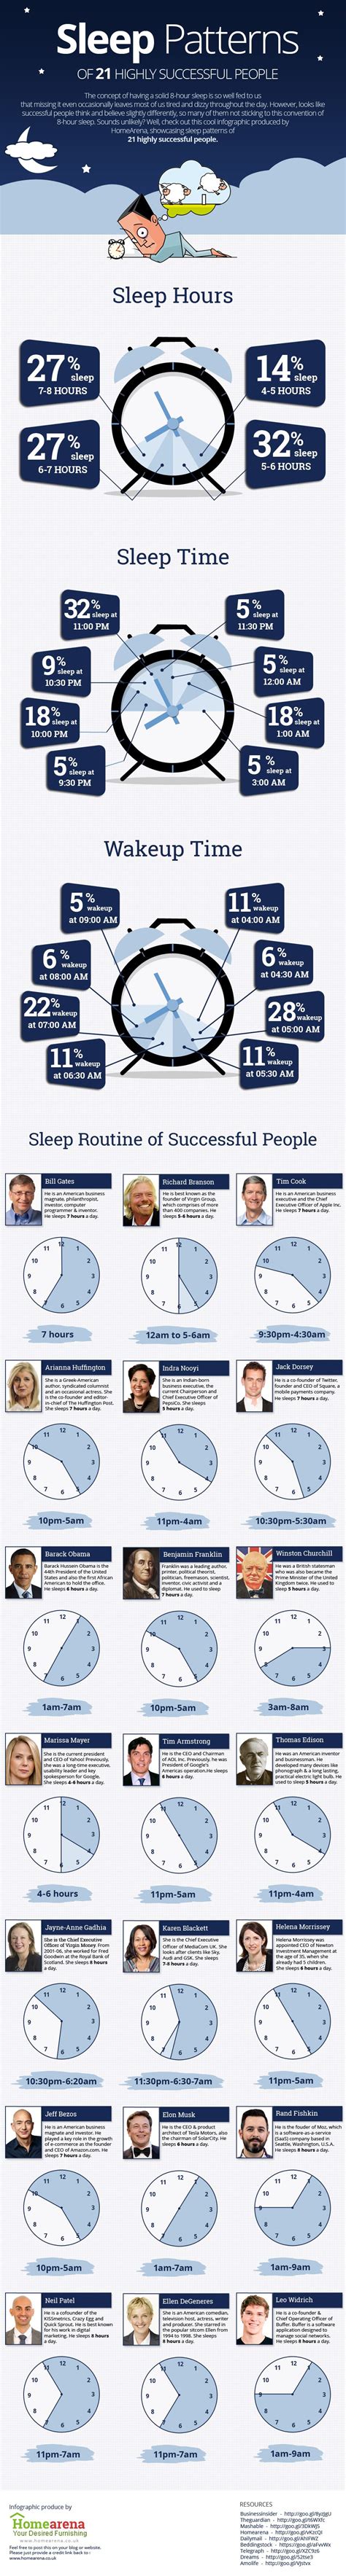 The Sleep Patterns Of 21 Highly Successful And Productive People